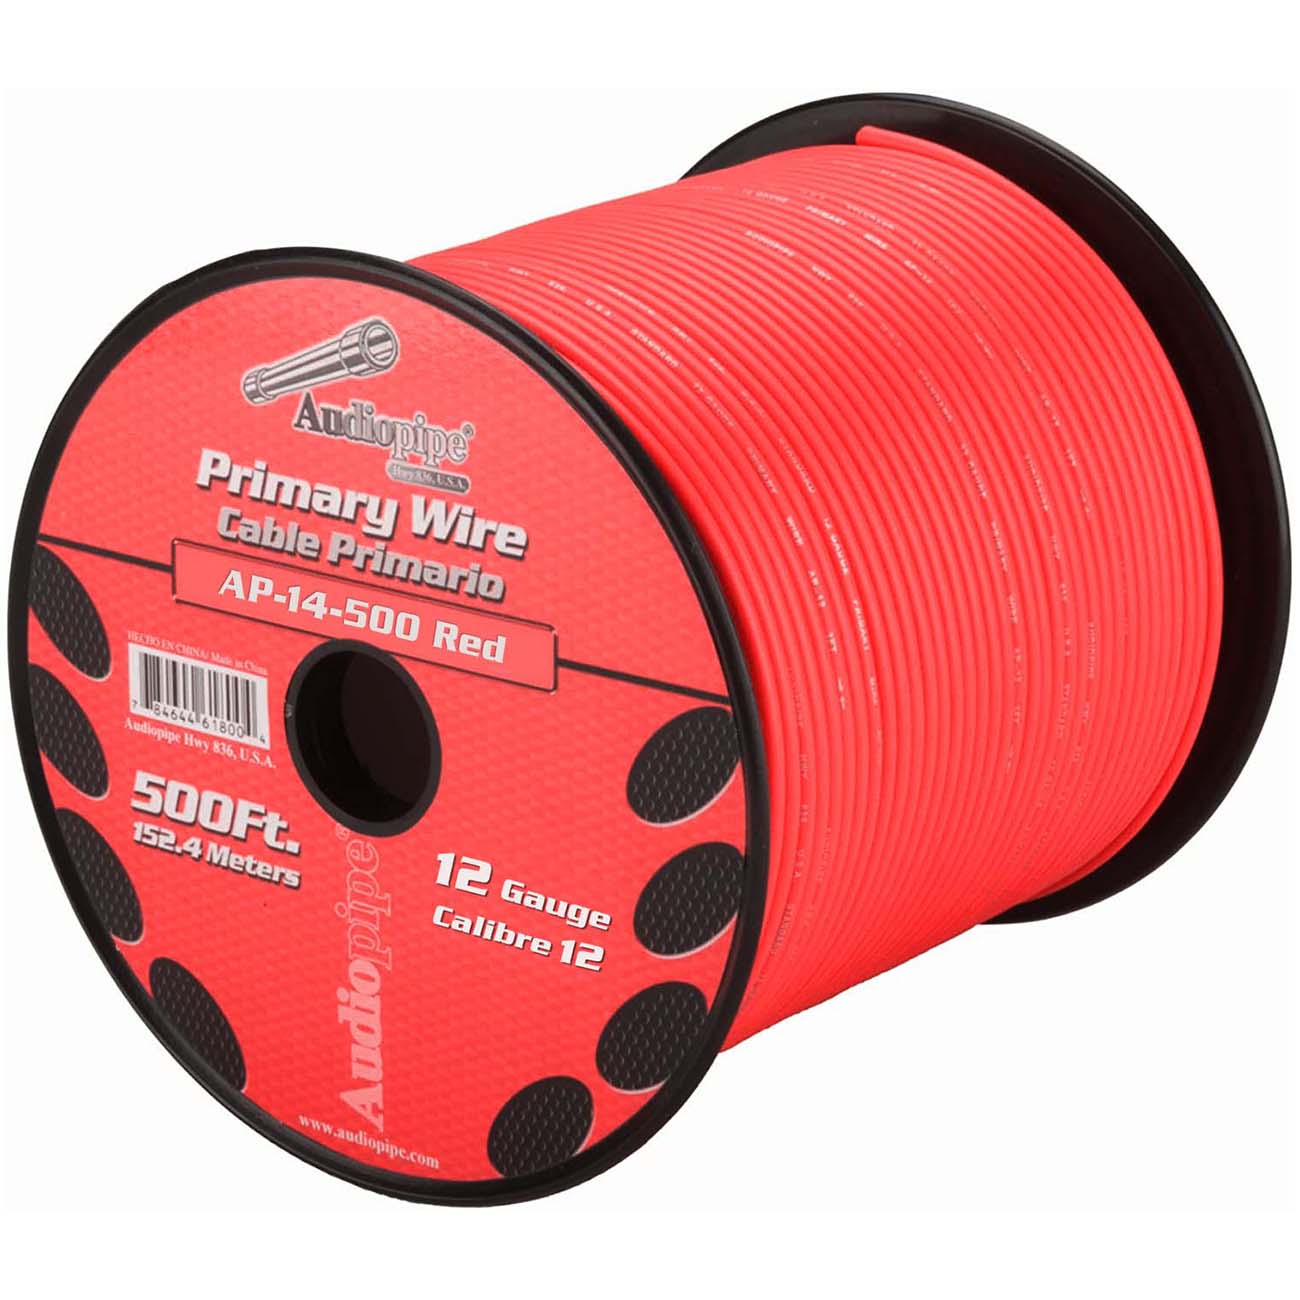 Audiopipe 12 Gauge 500ft Primary Wire Red